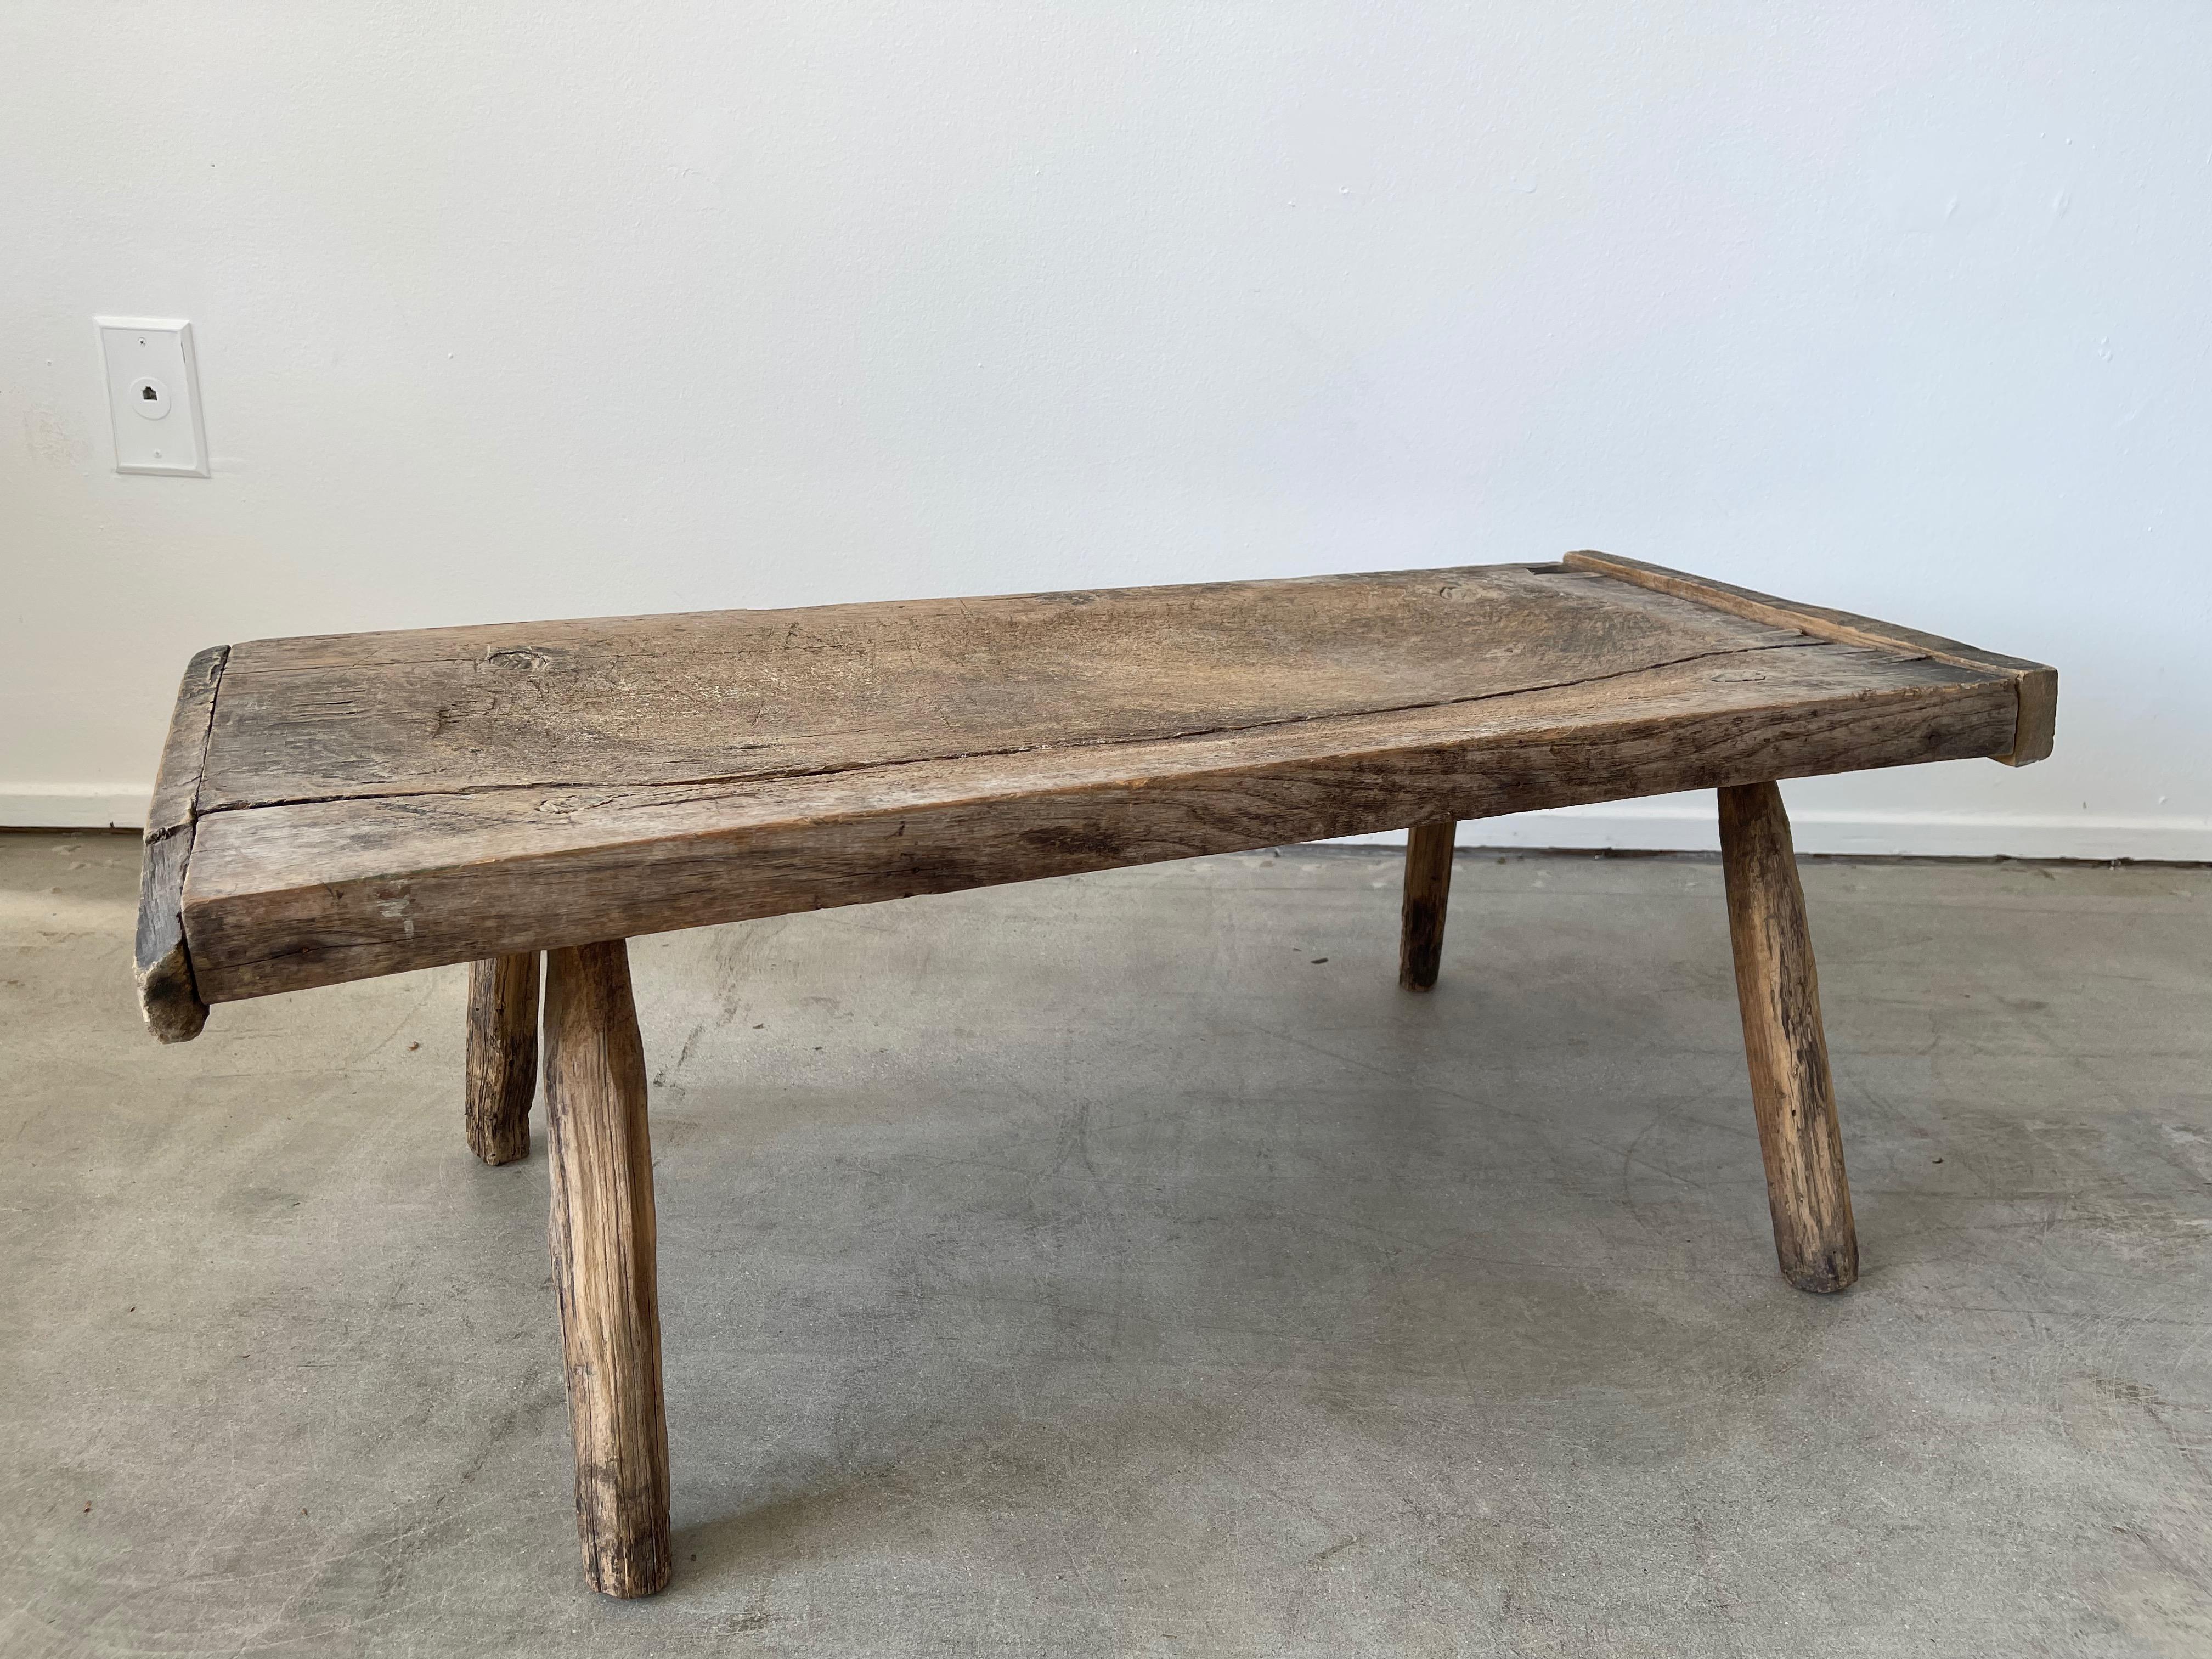 Great primitive table with wonderful character and lines. 
Splayed legs with center crack - that can only come with decades of wear!